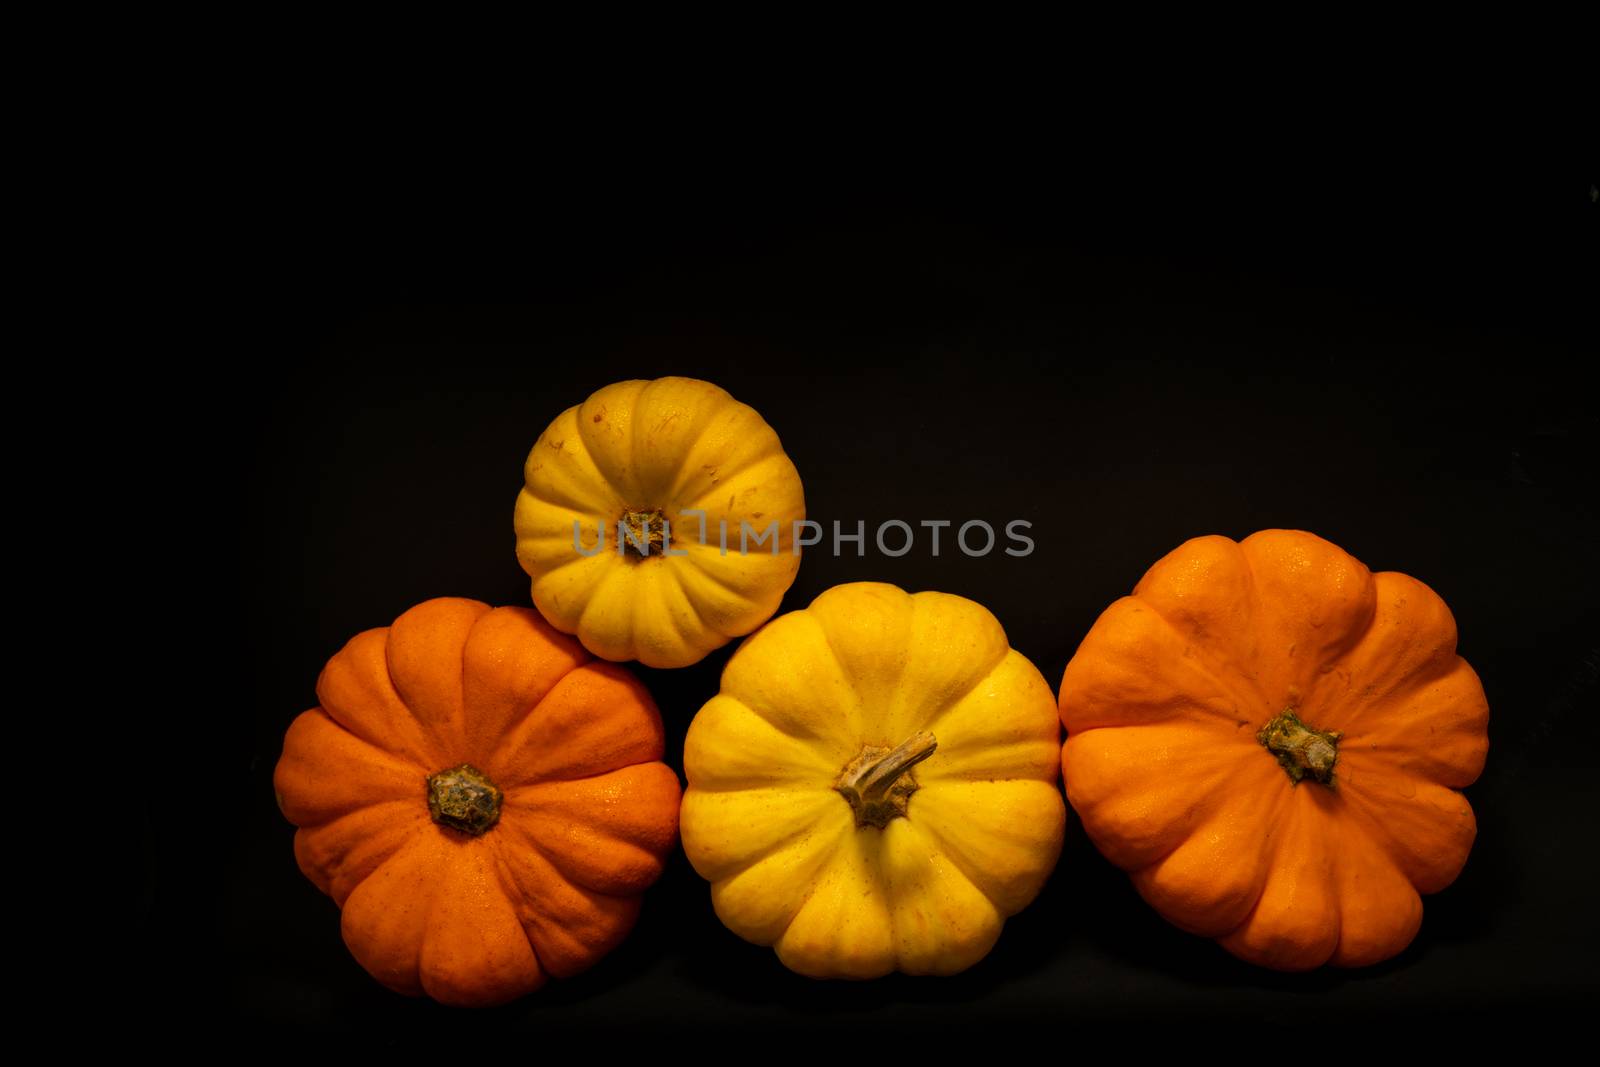 Colorful pumpkins on wood table with dark background and space for text by peerapixs